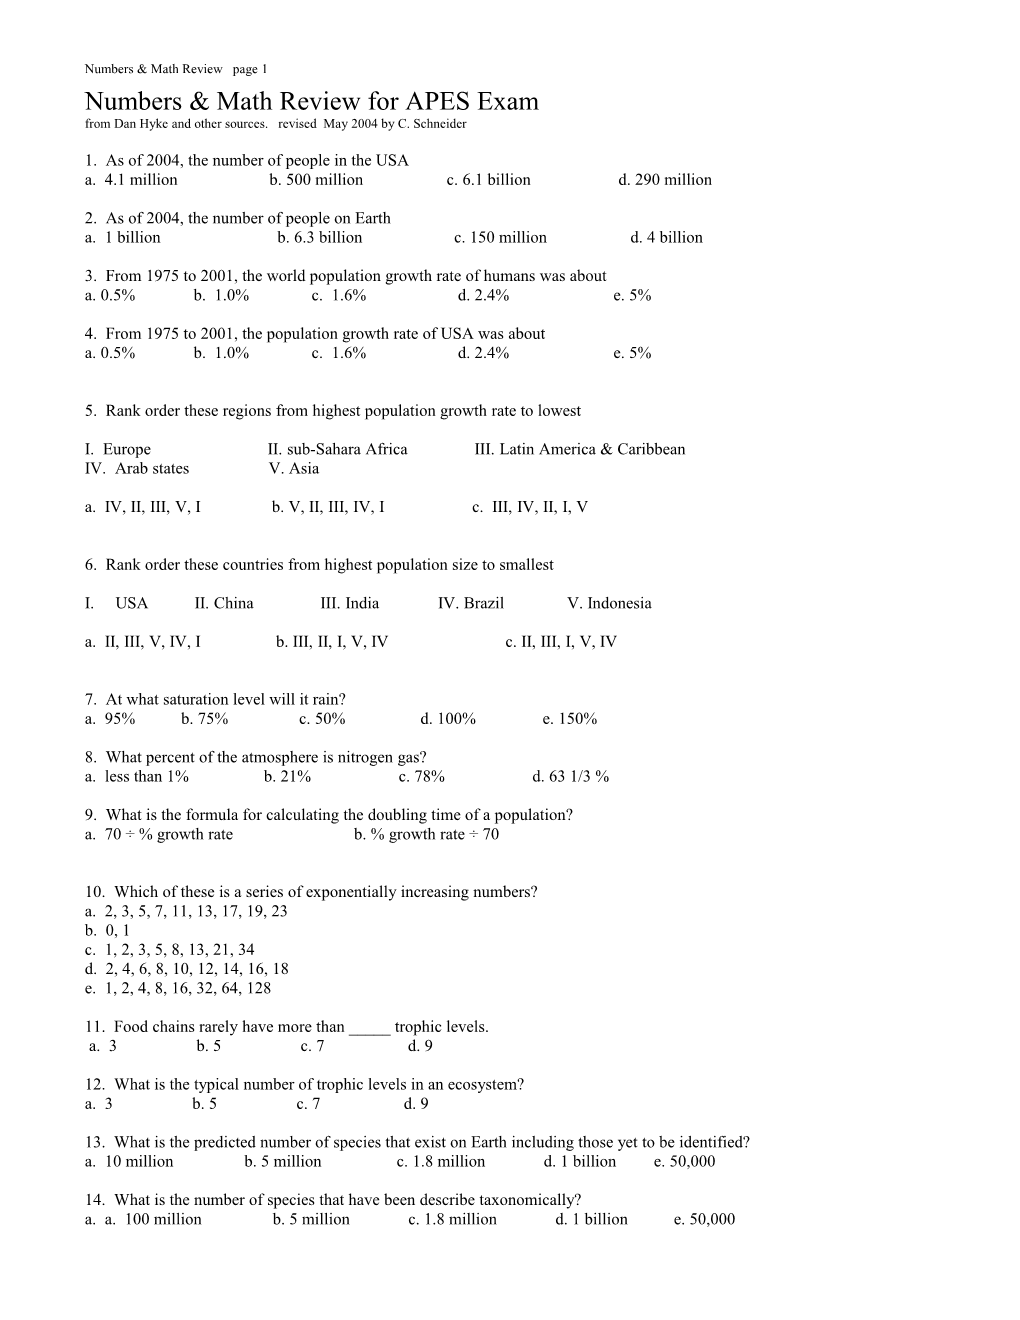 Numbers & Math Review Page 3